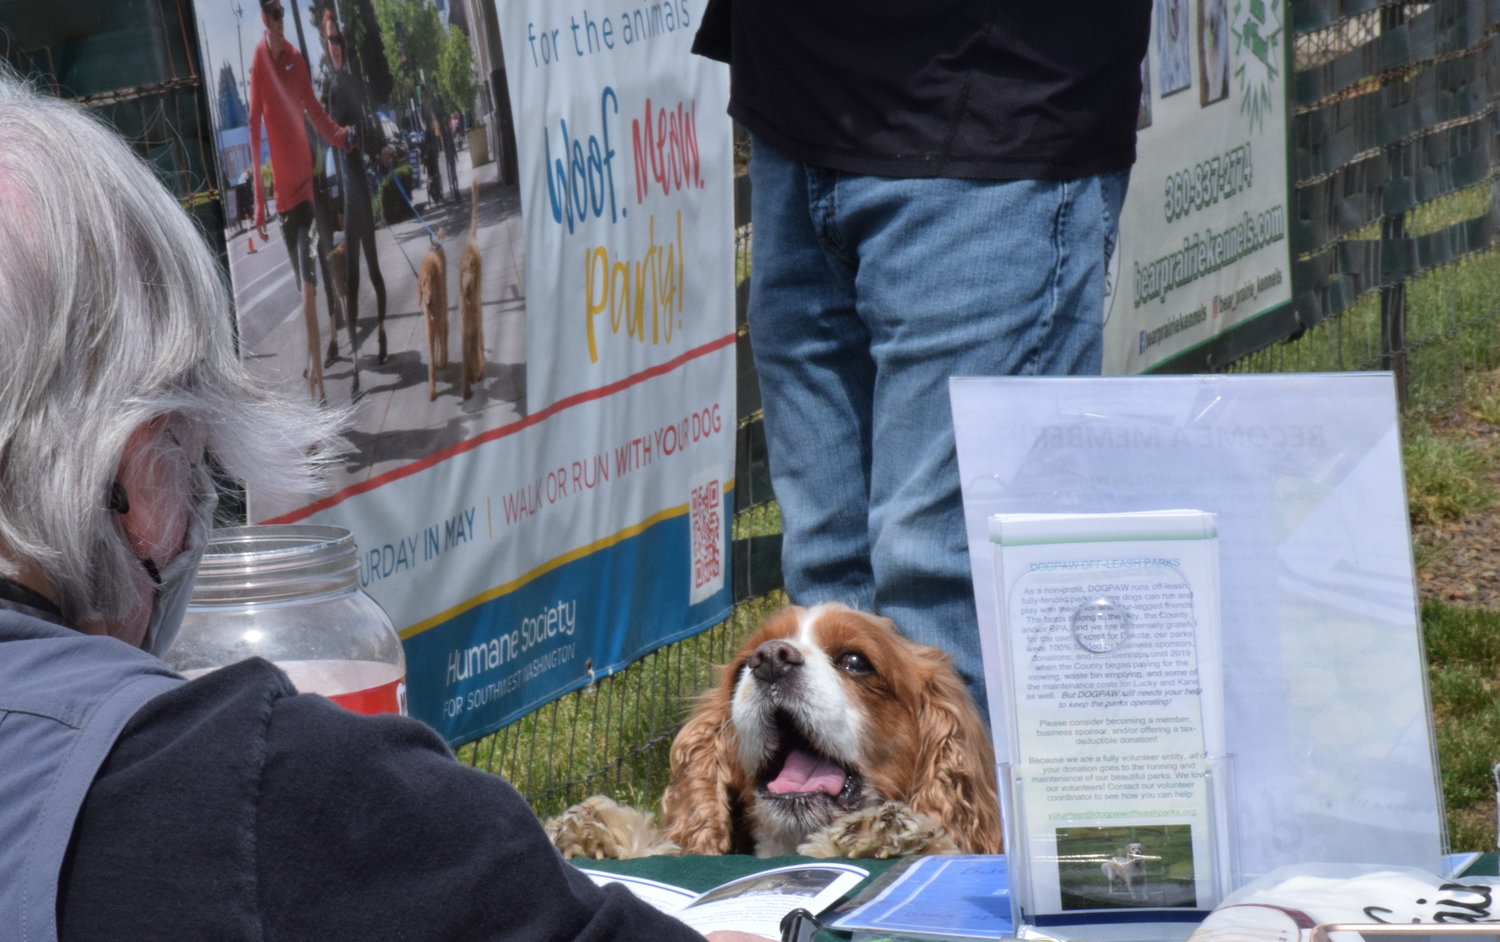 Chauncey, the Cavalier King Charles Spaniel owned by DOGPAW President Sally Jenkins, greets DOGPAW Treasurer Donna Clark during a cleanup event at Lucky Dog Park in Brush Prairie May 8.